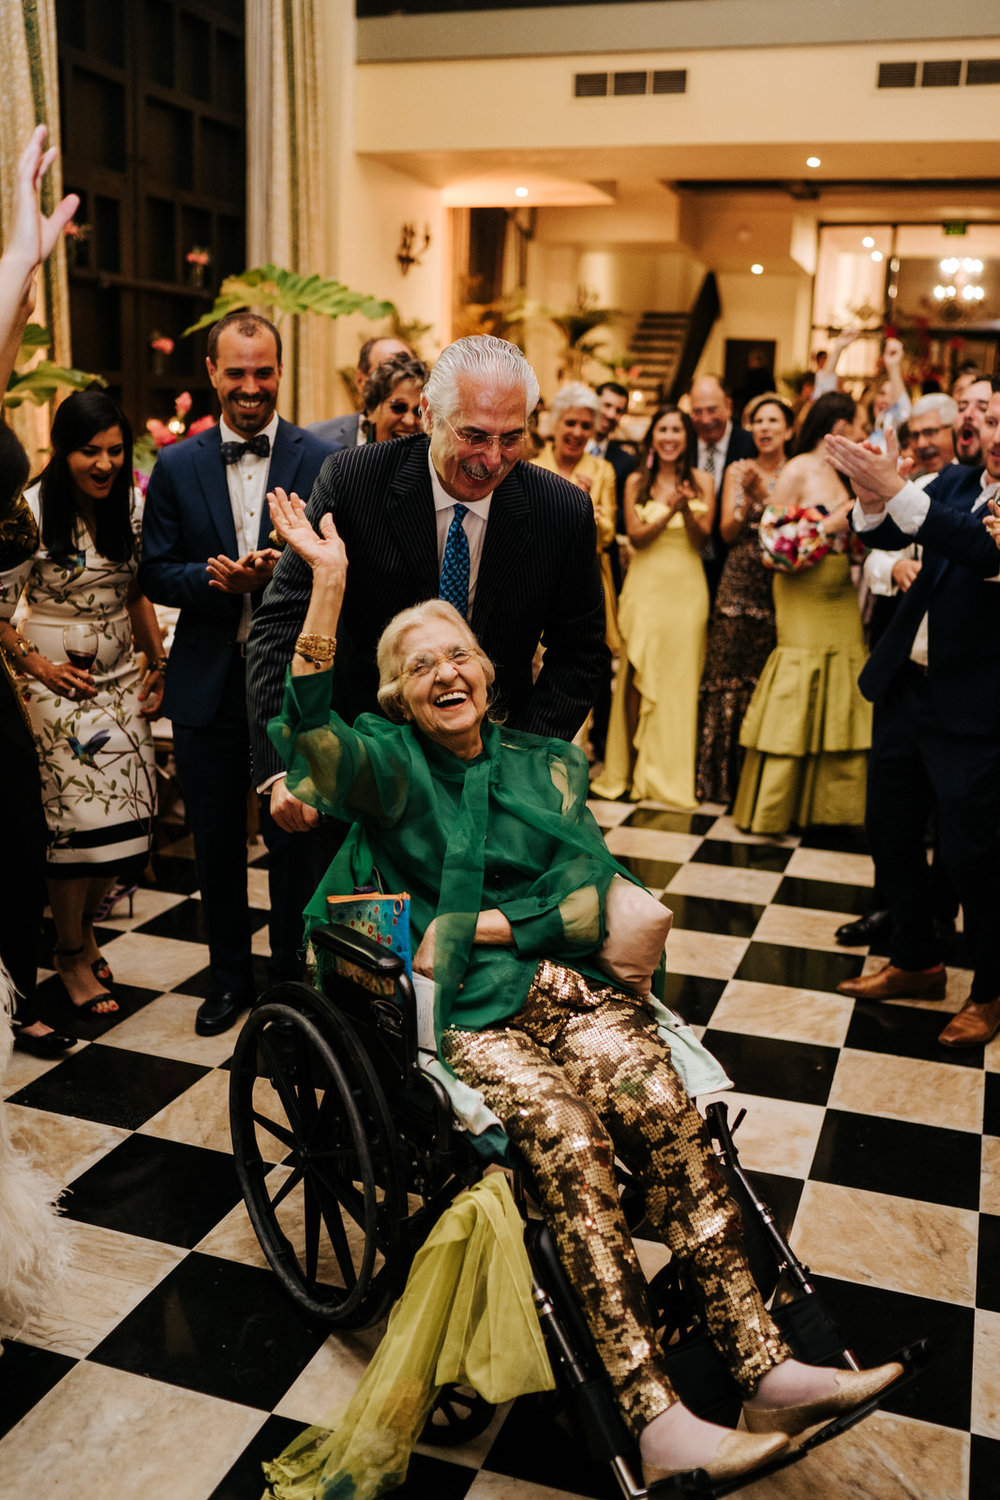  Bride's grandmother is on the dancefloor in her wheelchair and smiling as everyone encourages her and she waves 